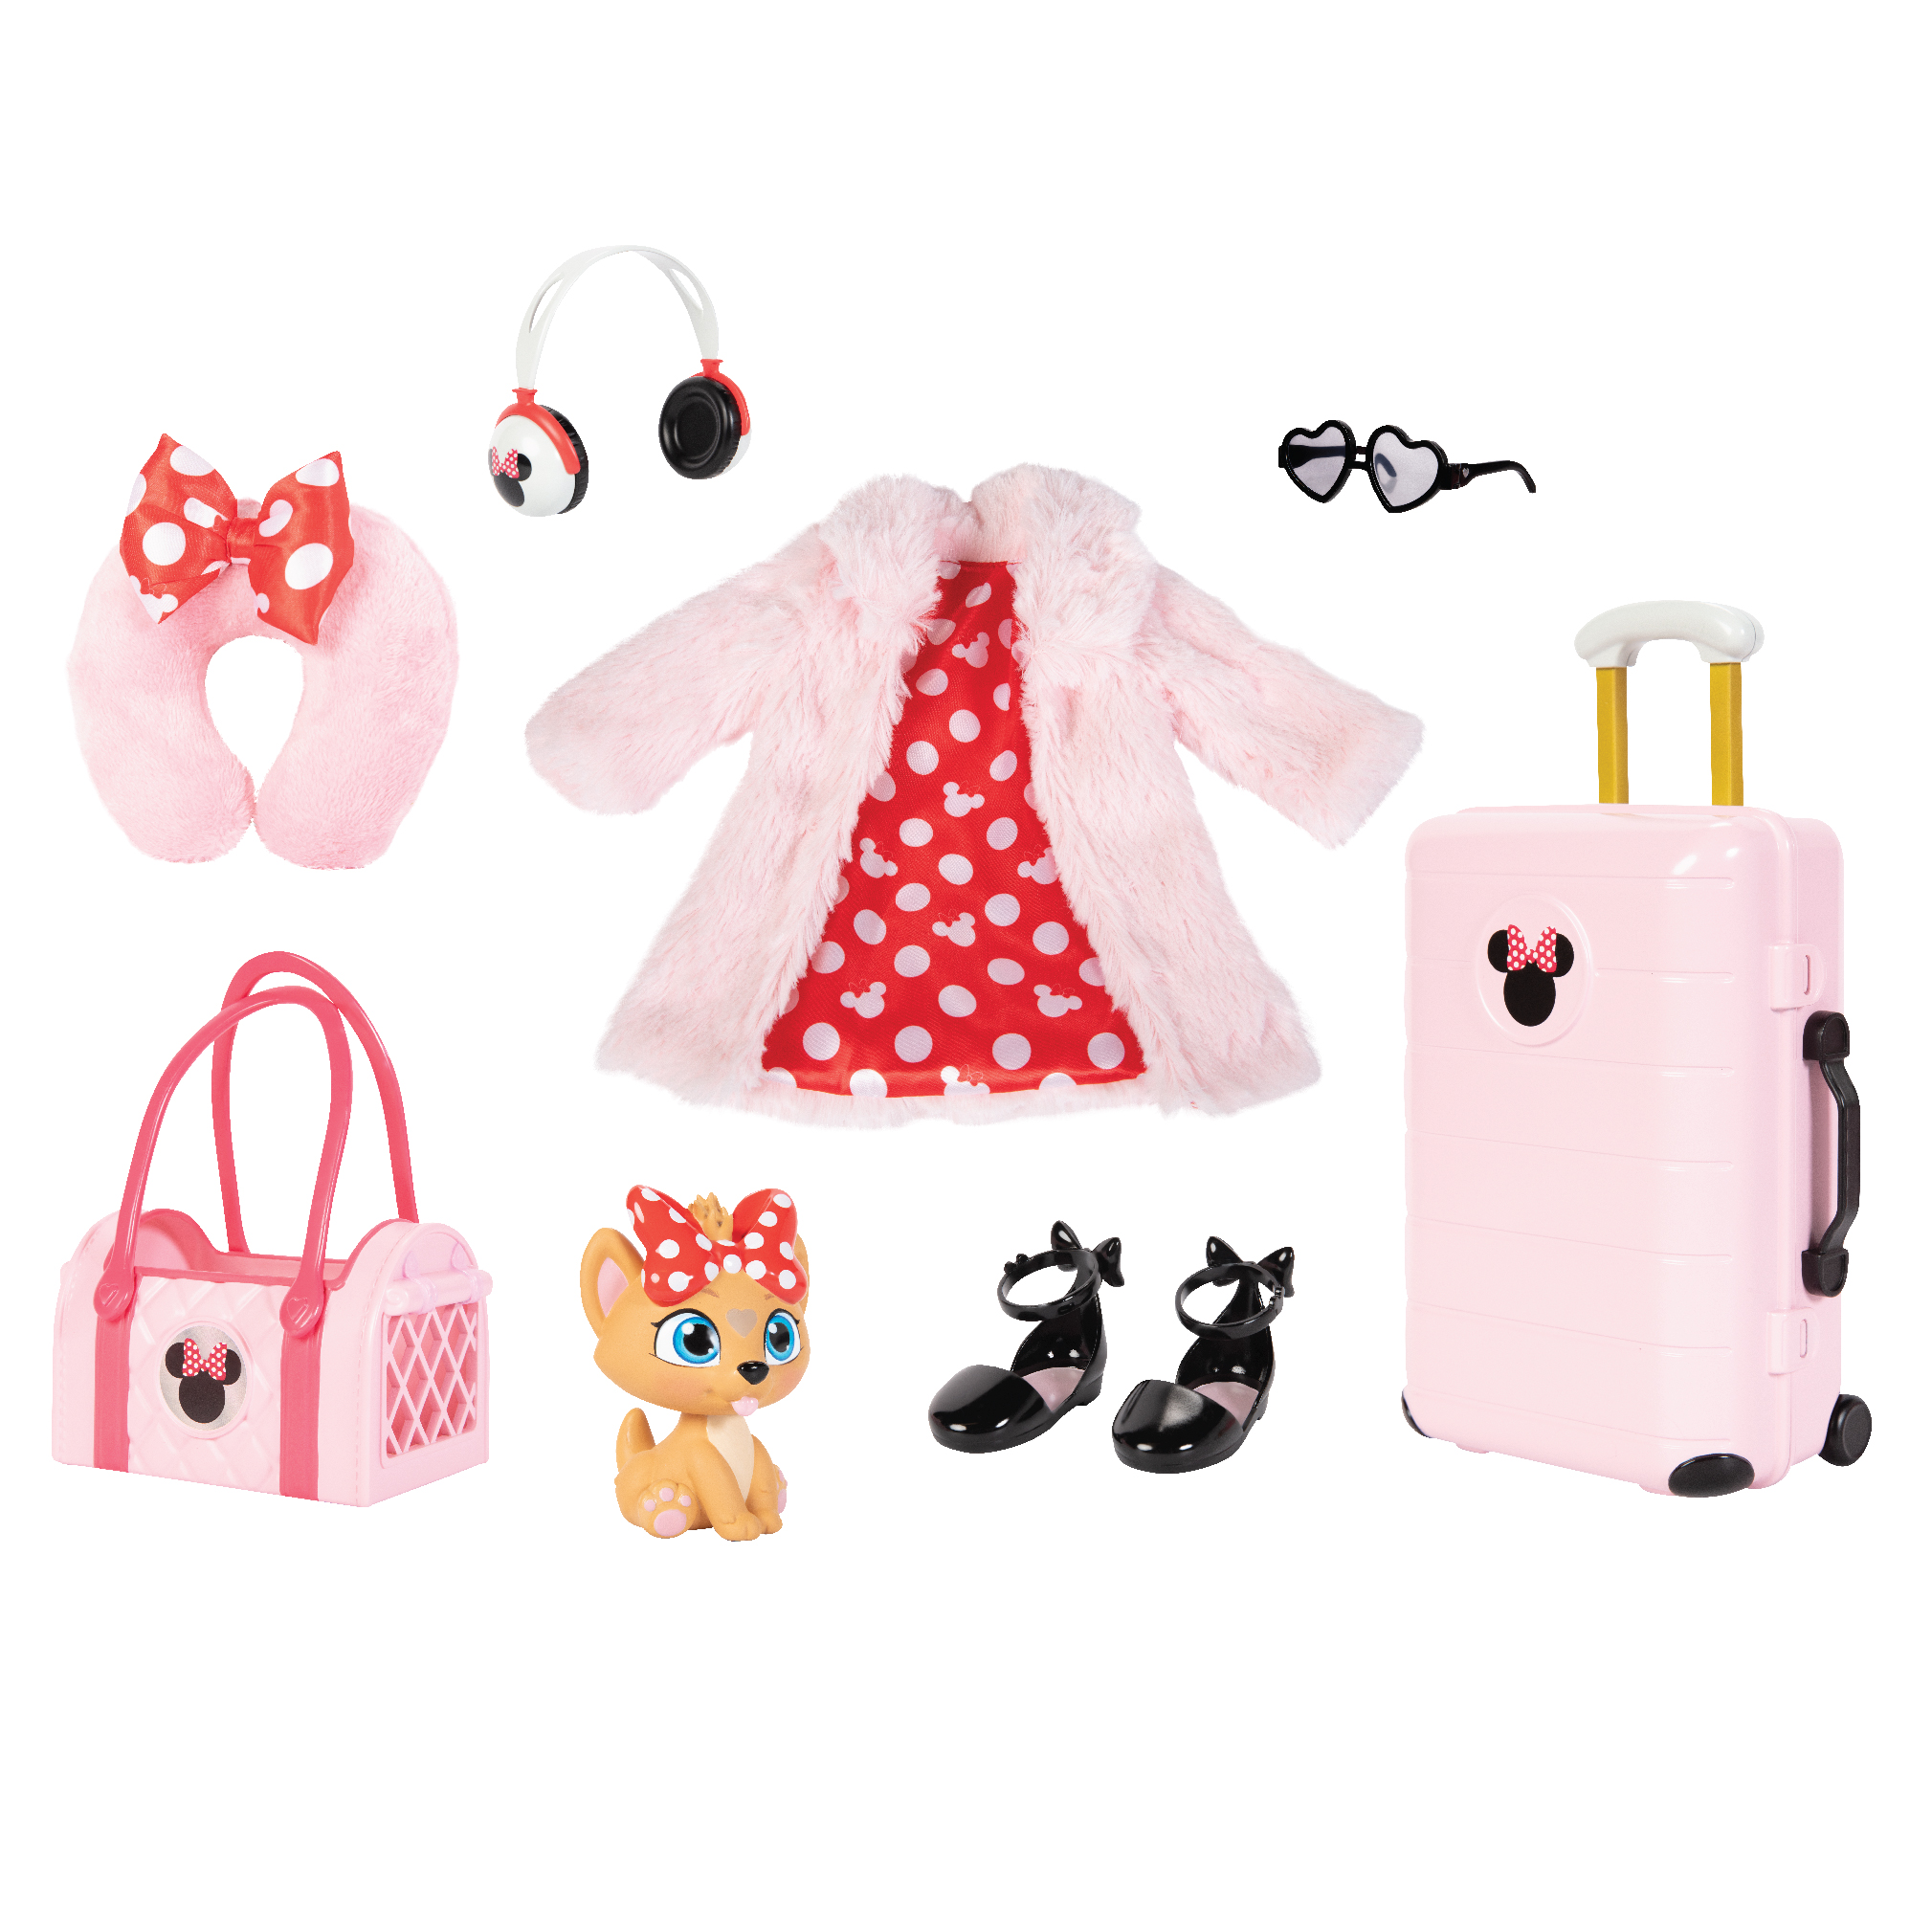 18-Inch Inspired by Minnie Mouse Deluxe Fashion & Accessory Pack - JAKKS  Pacific, Inc.